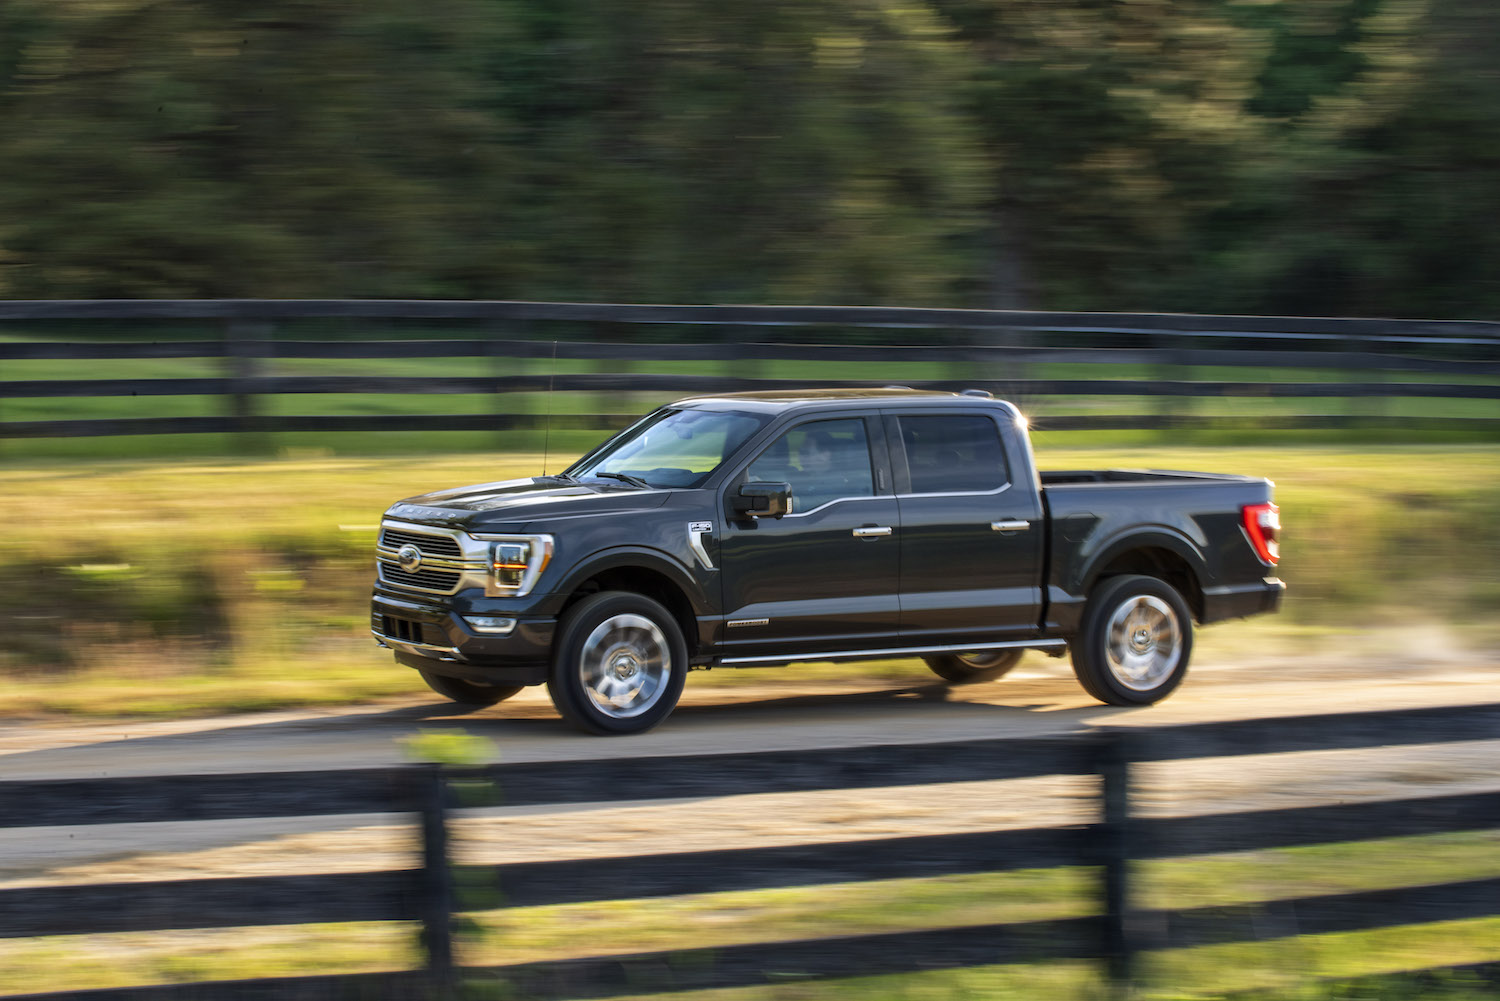 Promo photo of a dark gray Ford F-150 powerboost hybrid truck driving down a country road, a fence visible in the background.